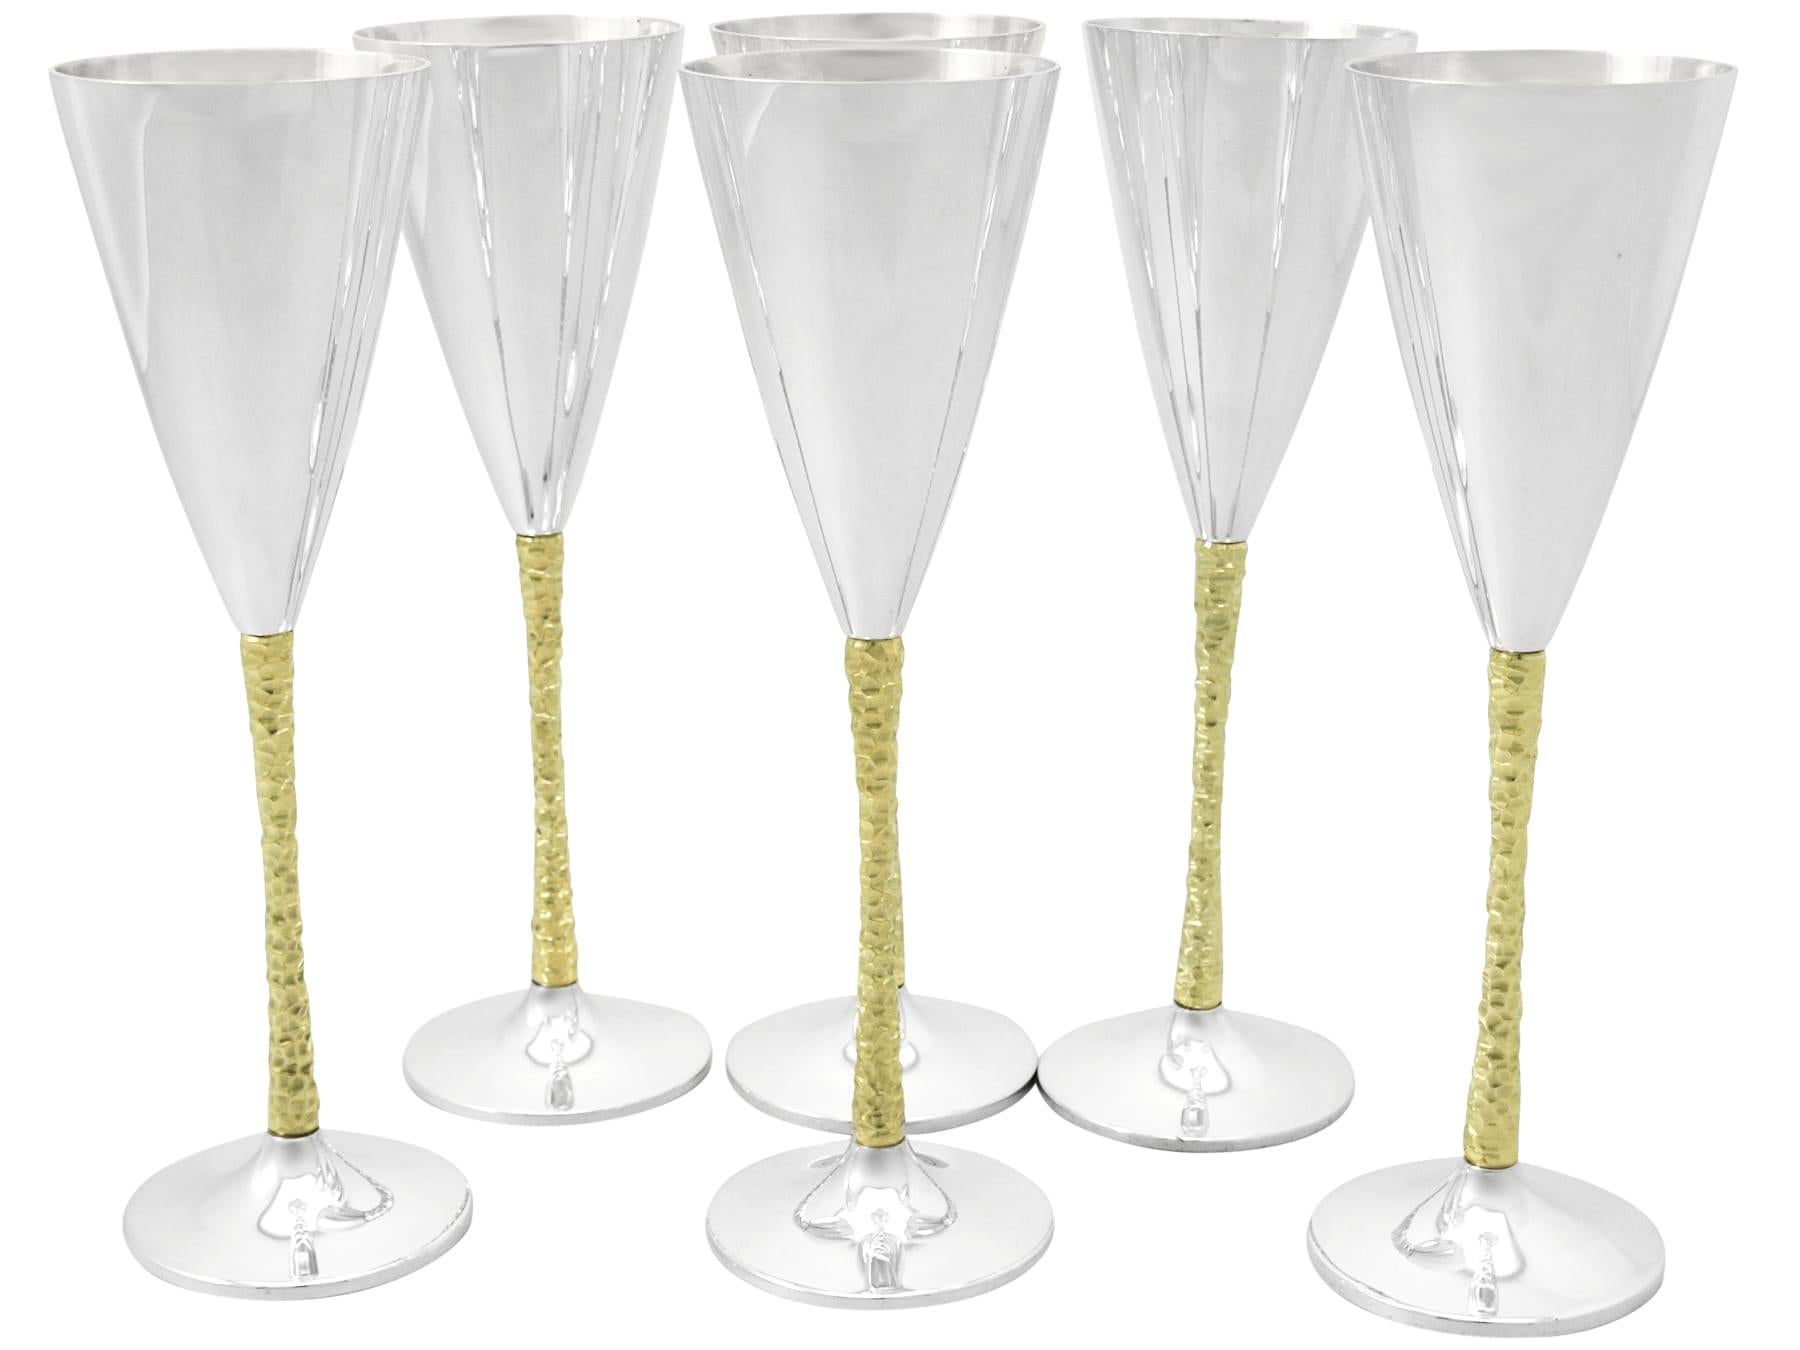 An fine and impressive set of six vintage Elizabeth II English sterling silver champagne flutes made by Stuart Devlin; an addition to our range of collectable silverware.

These impressive vintage Elizabeth II sterling silver champagne flutes have